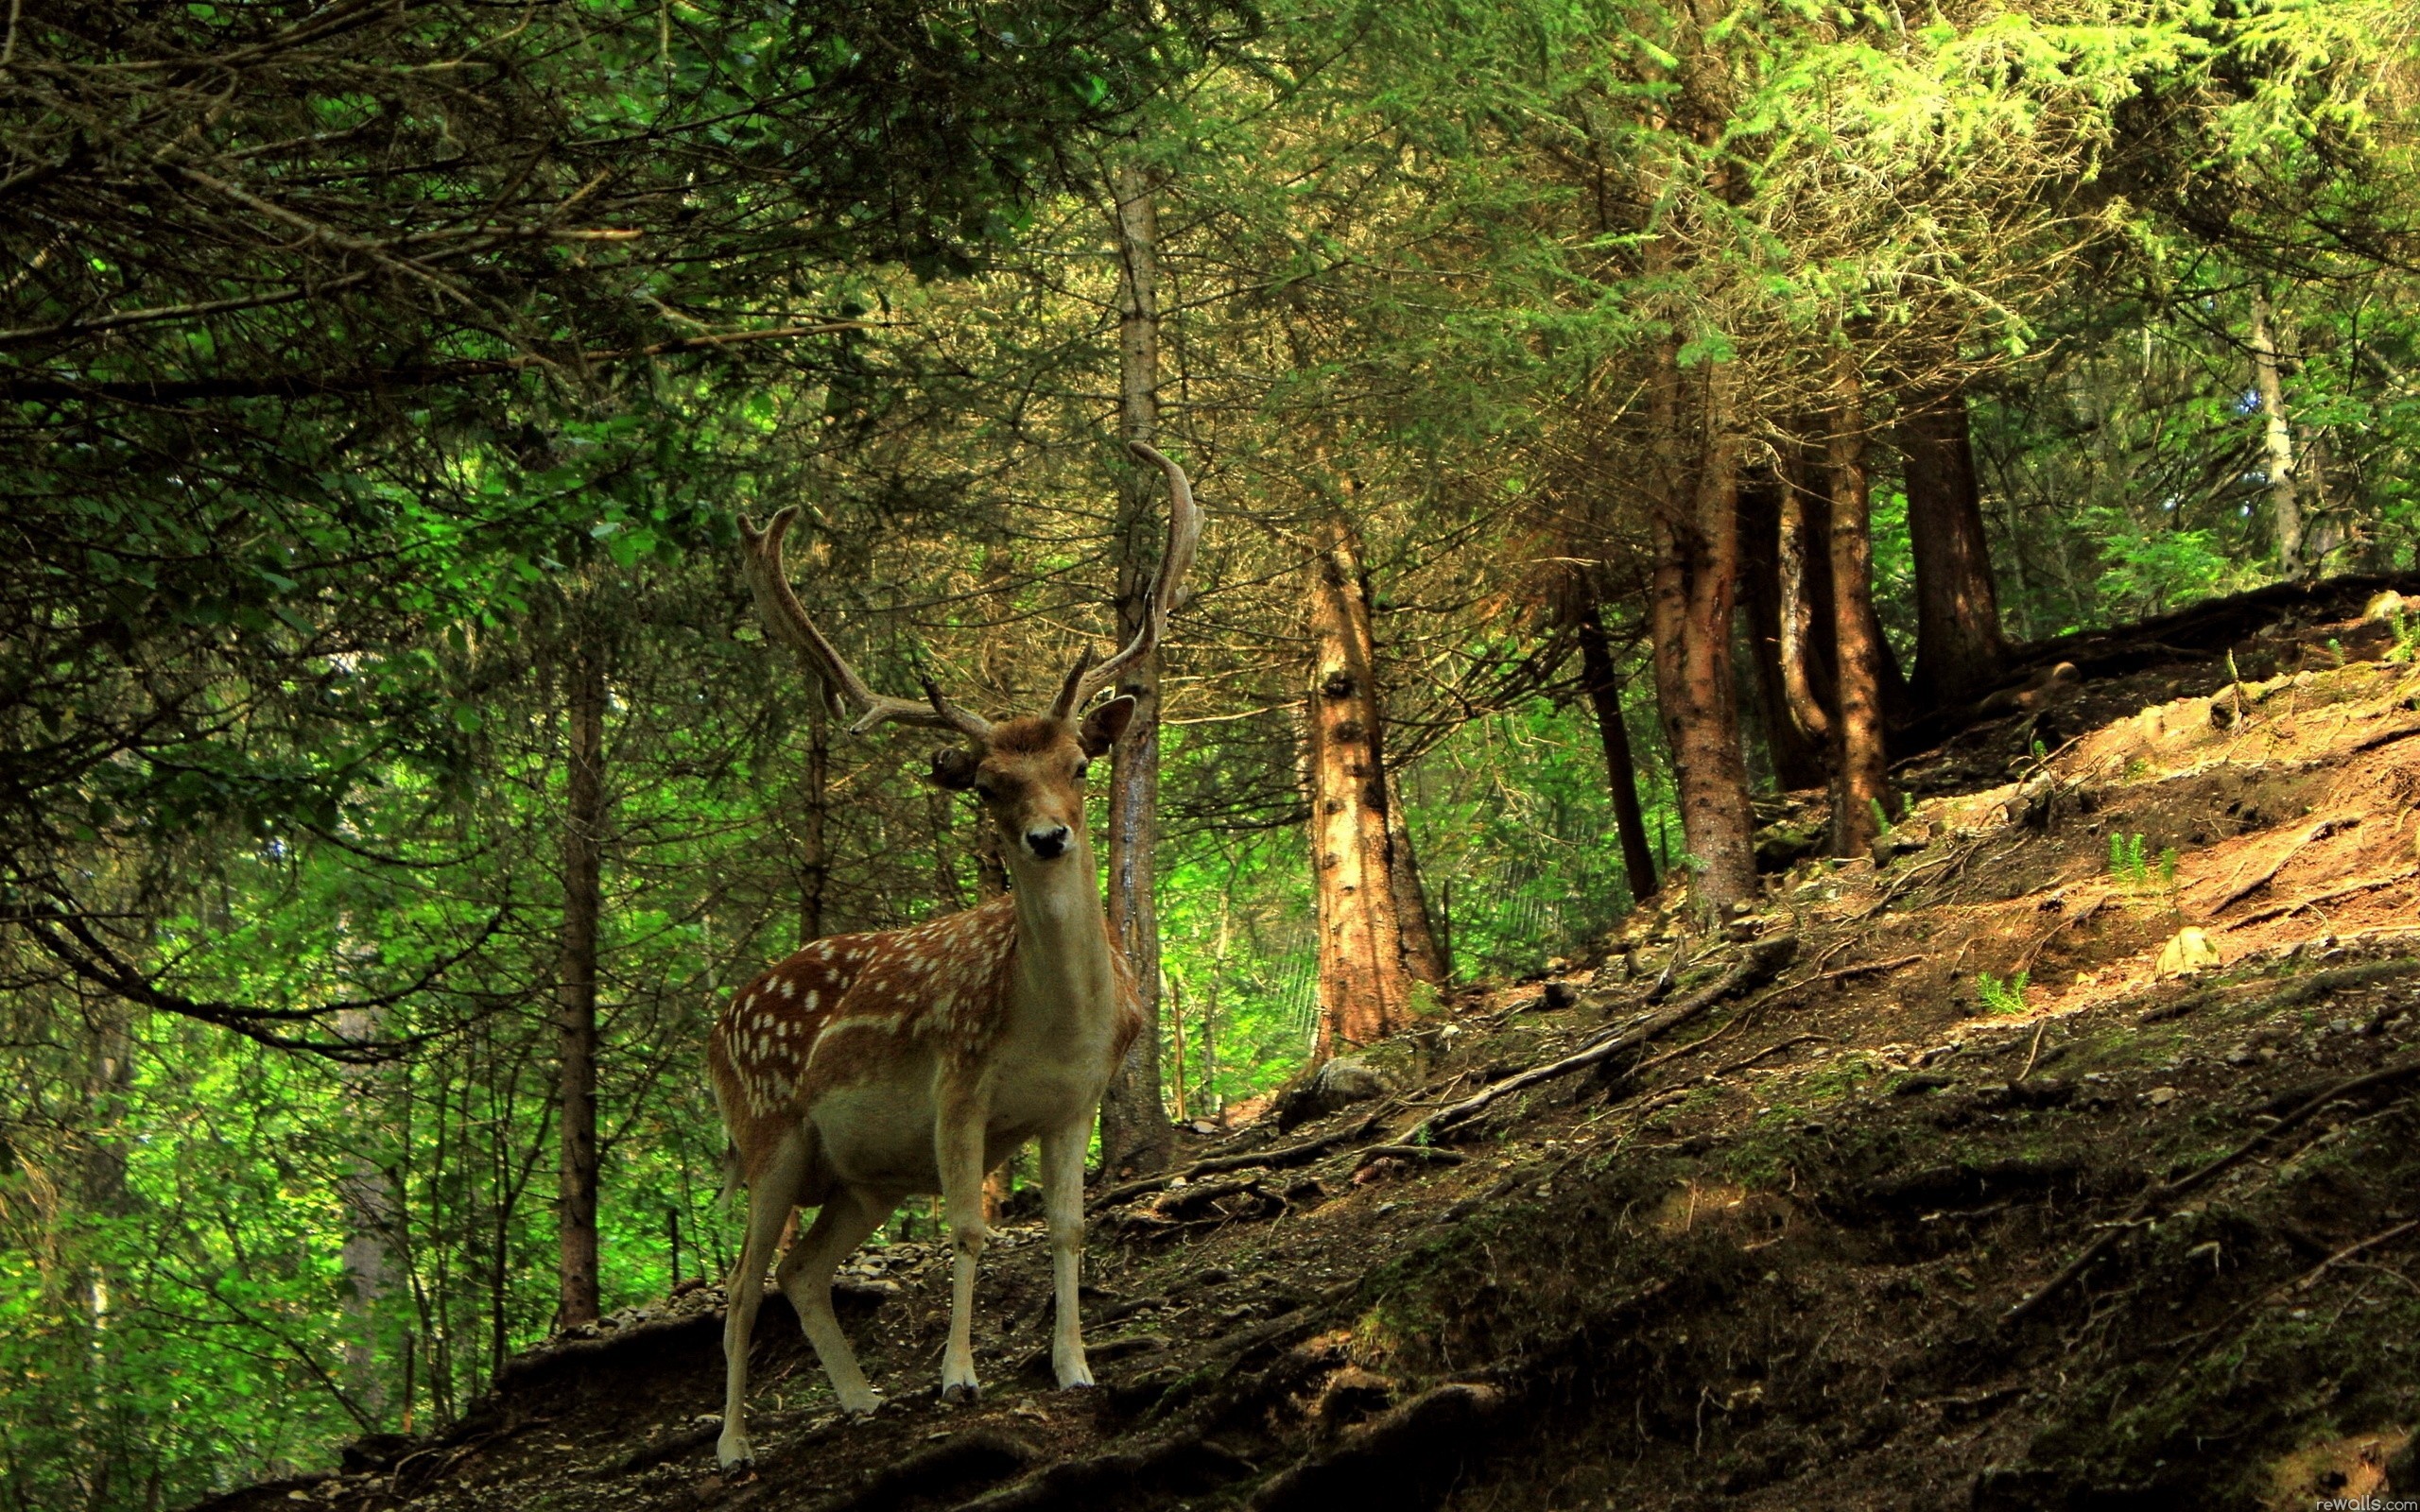 2560x1600 ... wallpaper 1920x1080 696254  Backgrounds Of Deer Amazingforest  Colourful Life Animals Forest